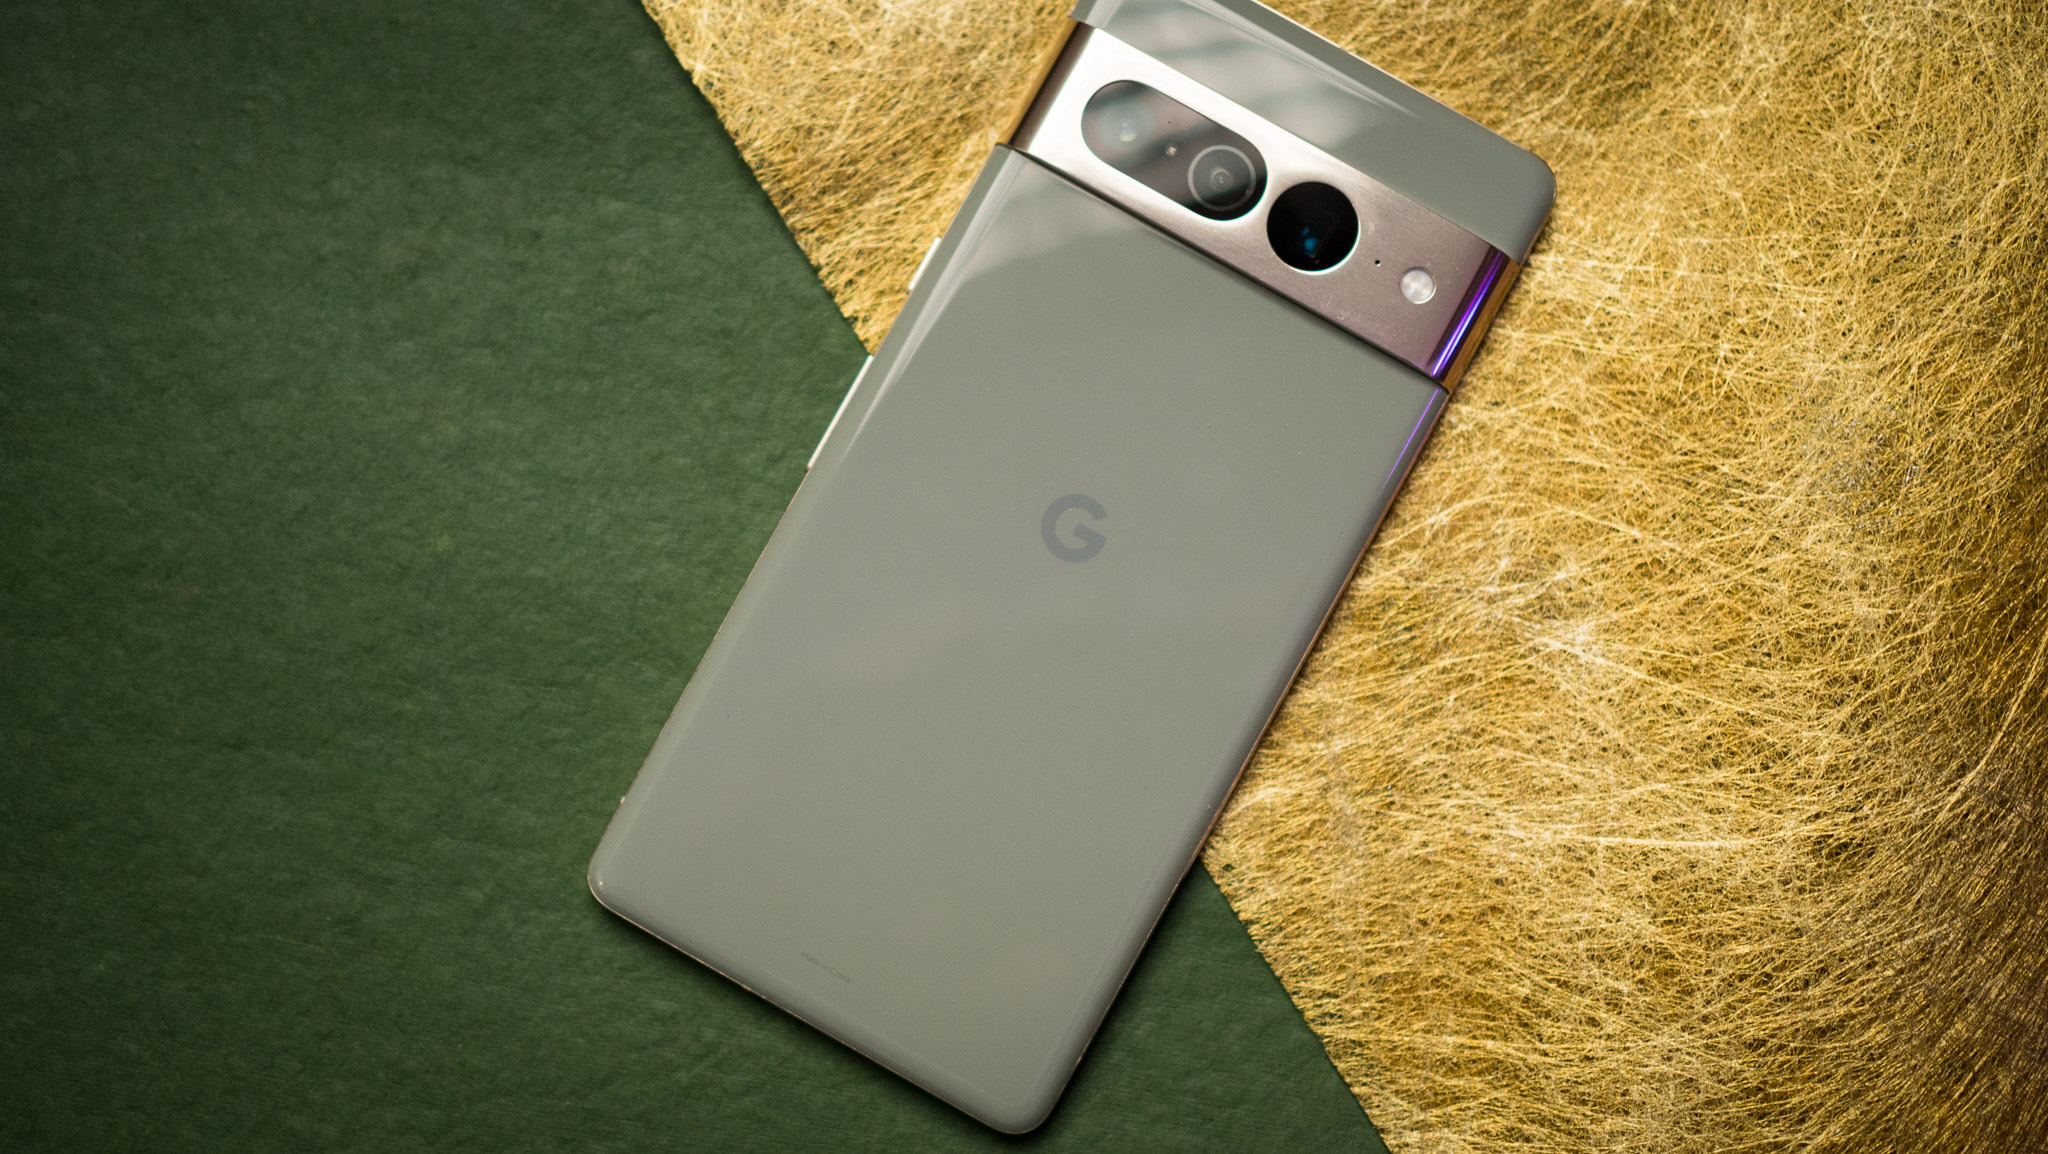 Google Pixel 7 Pro back view with Google logo highlighted against green and gold background